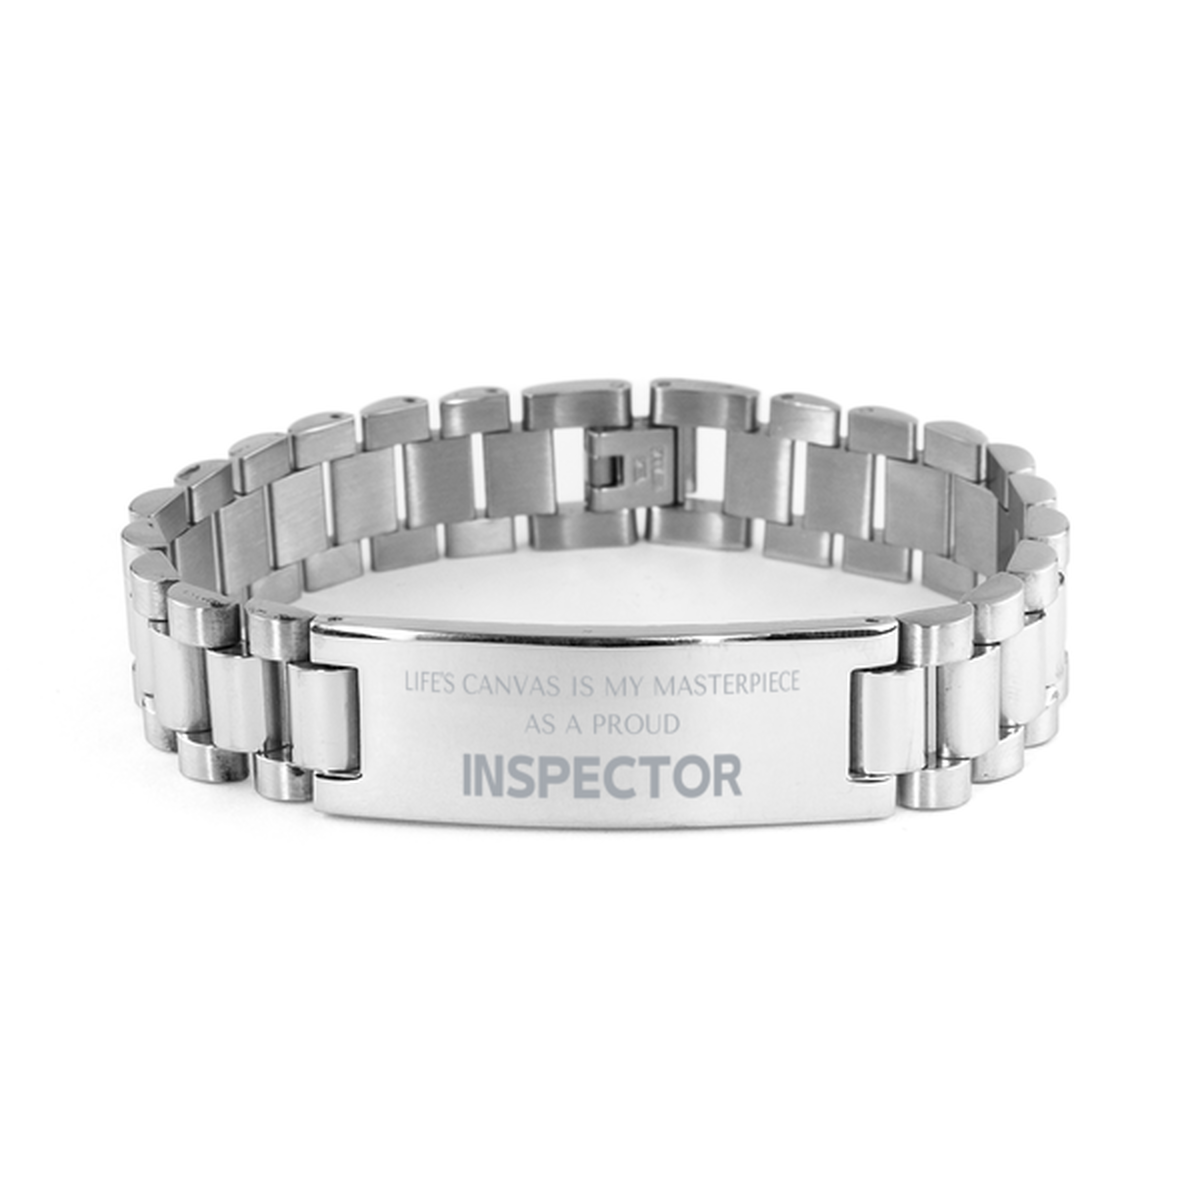 Proud Inspector Gifts, Life's canvas is my masterpiece, Epic Birthday Christmas Unique Ladder Stainless Steel Bracelet For Inspector, Coworkers, Men, Women, Friends